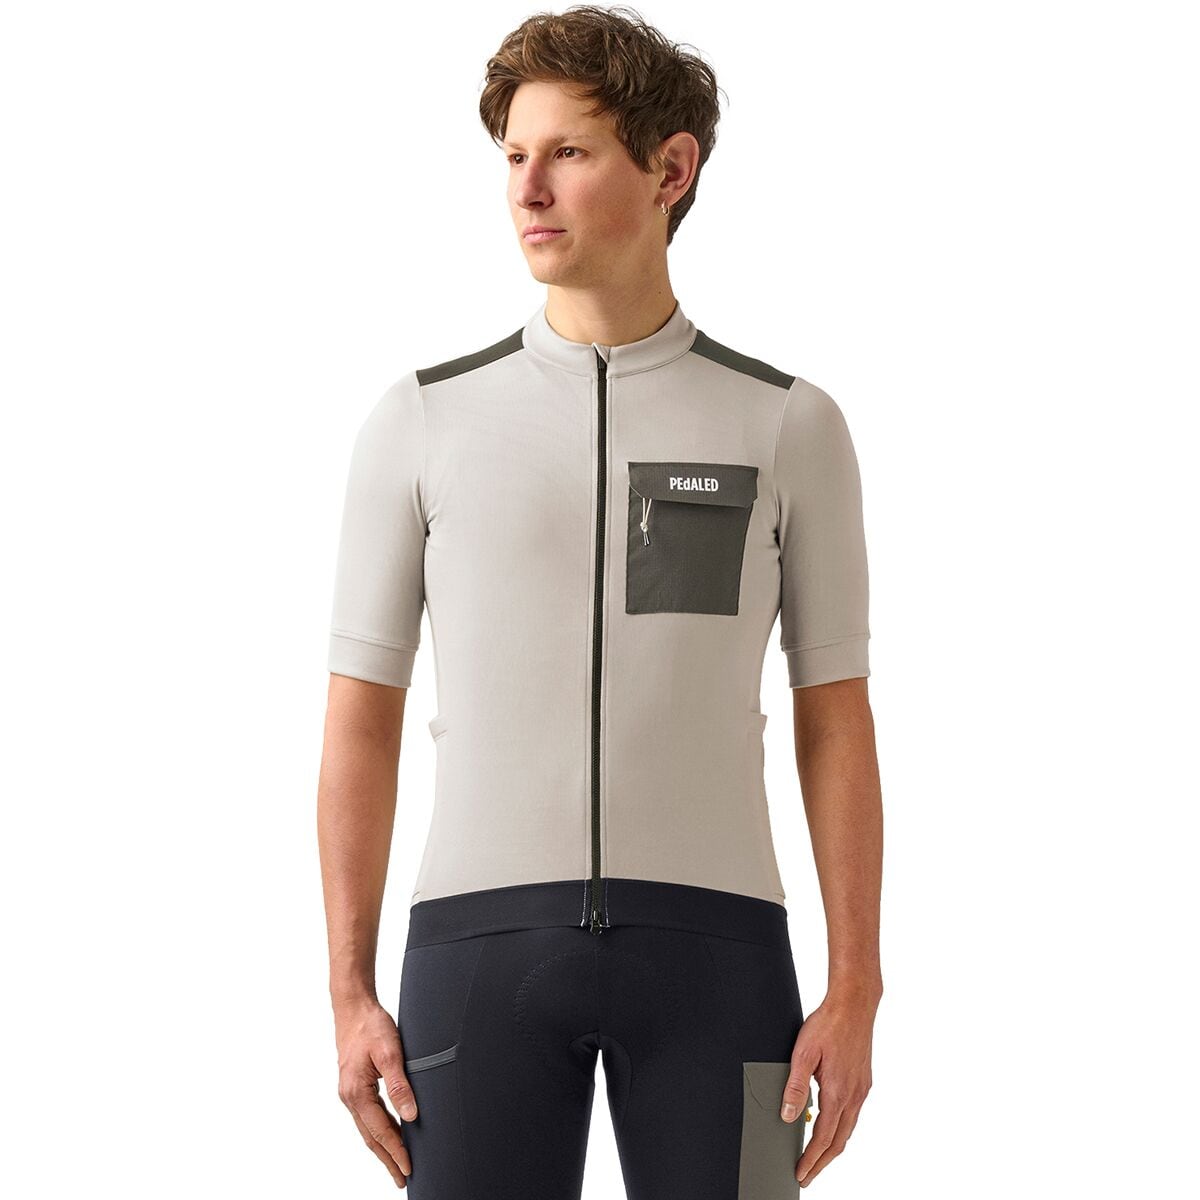 PEdALED Odyssey Merino Cycling Jersey - Mens